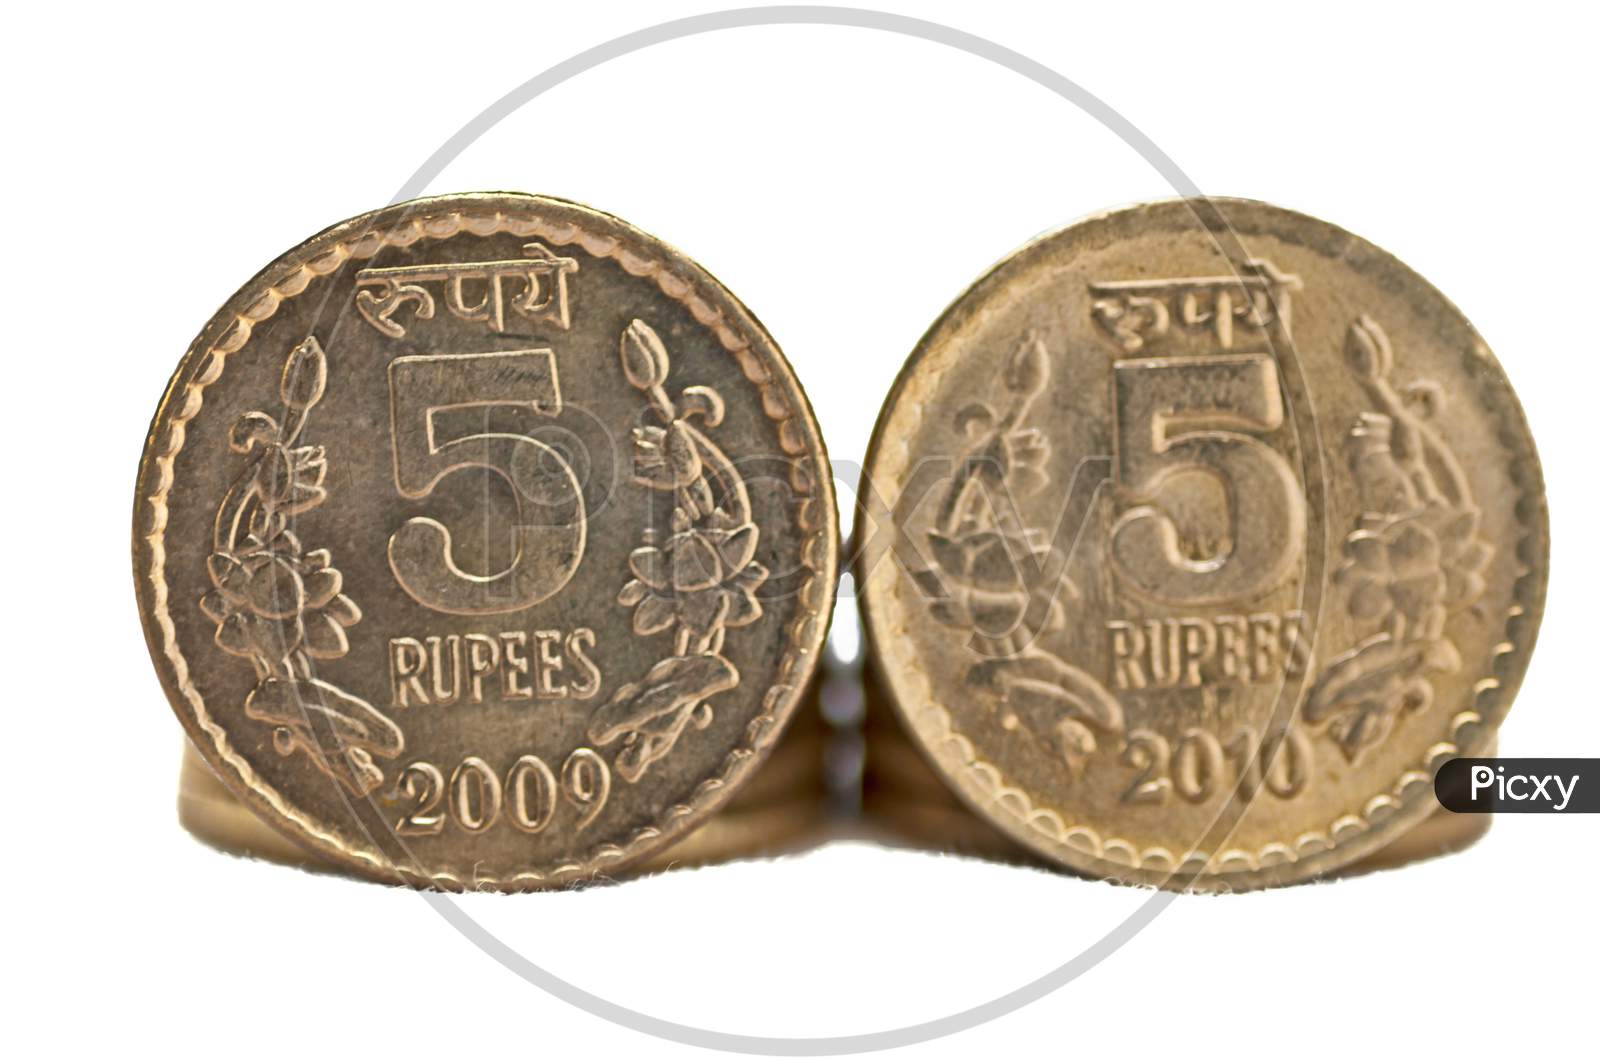 Close Up Of Indian Coin 5 Rupees Isolated Copy Space